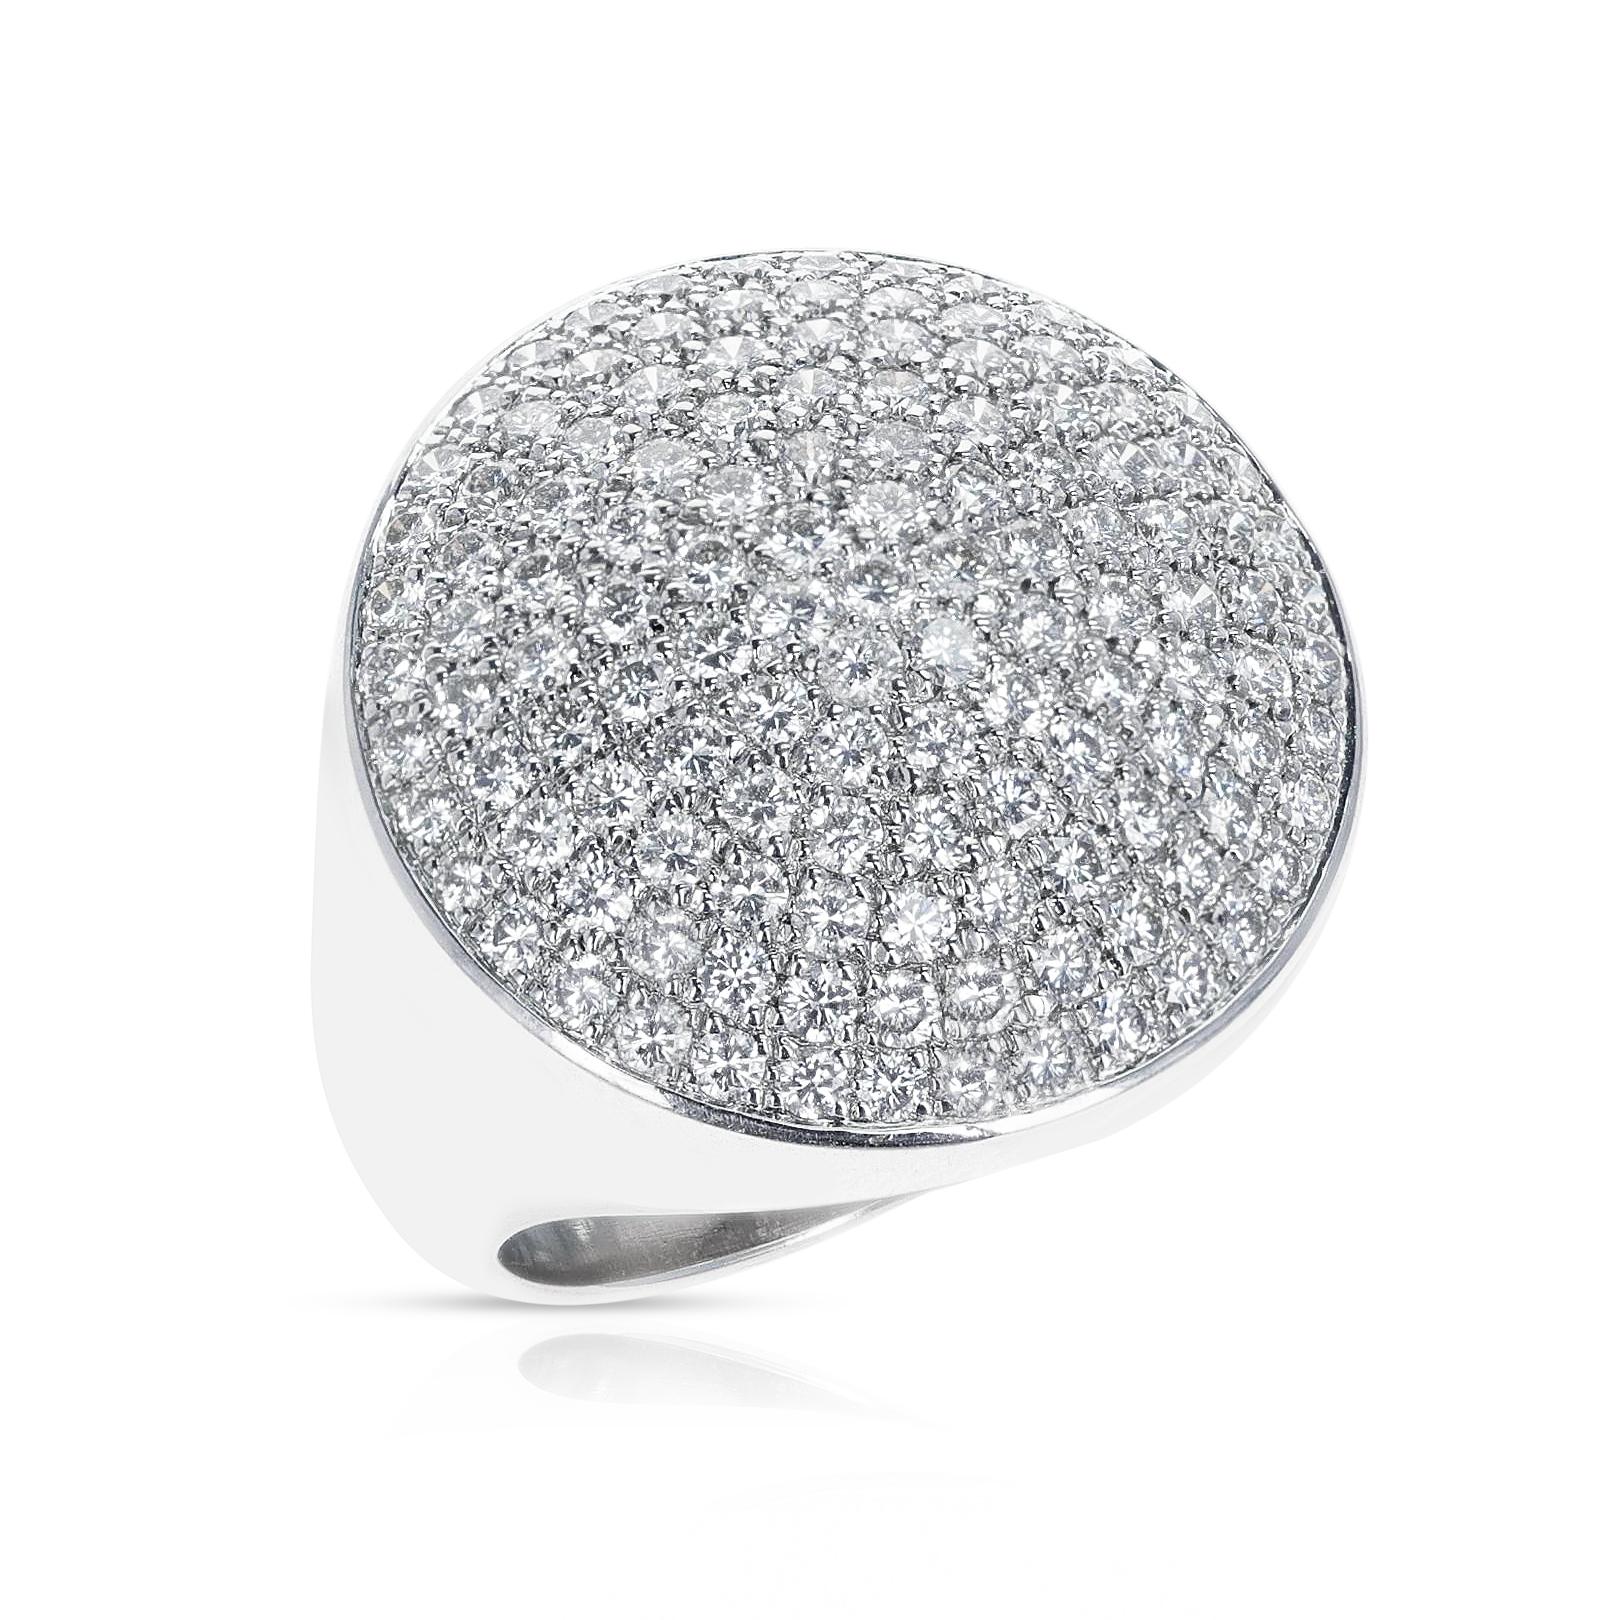 A bold and elegant Cartier Circular Round Diamond Cocktail Ring made in 18 Karat White Gold. The diamond weight is appx. 3.50 carats. The ring size is 7.50 US. The total weight is 21.88 grams. 

SKU: 528-GAJLQAMP